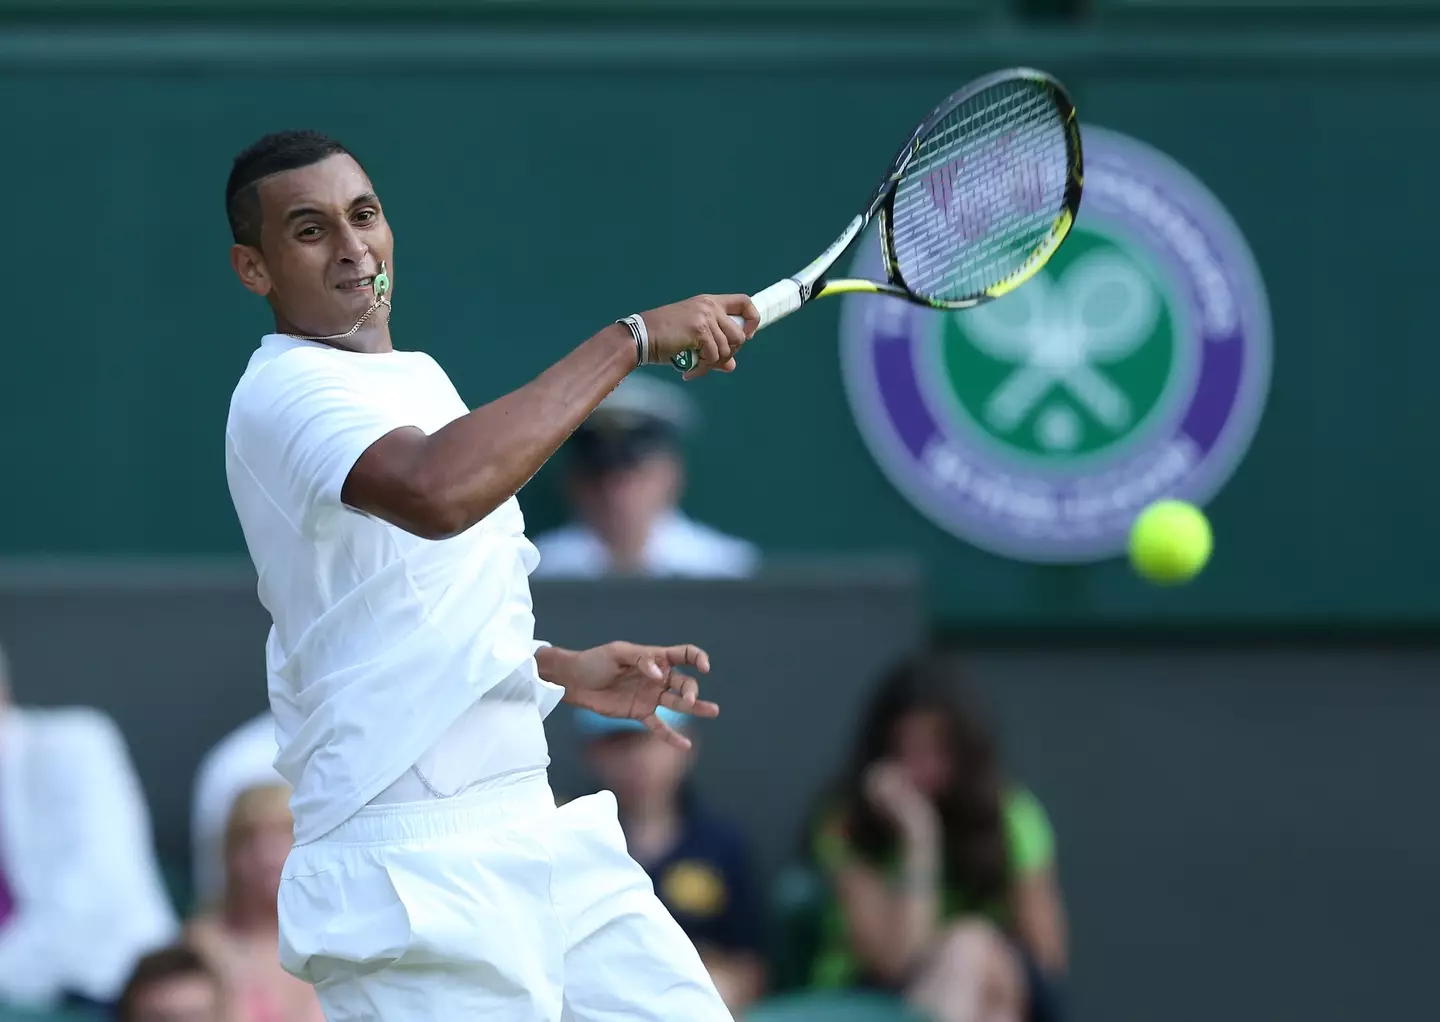 Nick Kyrgios in 2014, the last time he reached the quarter finals of Wimbledon.